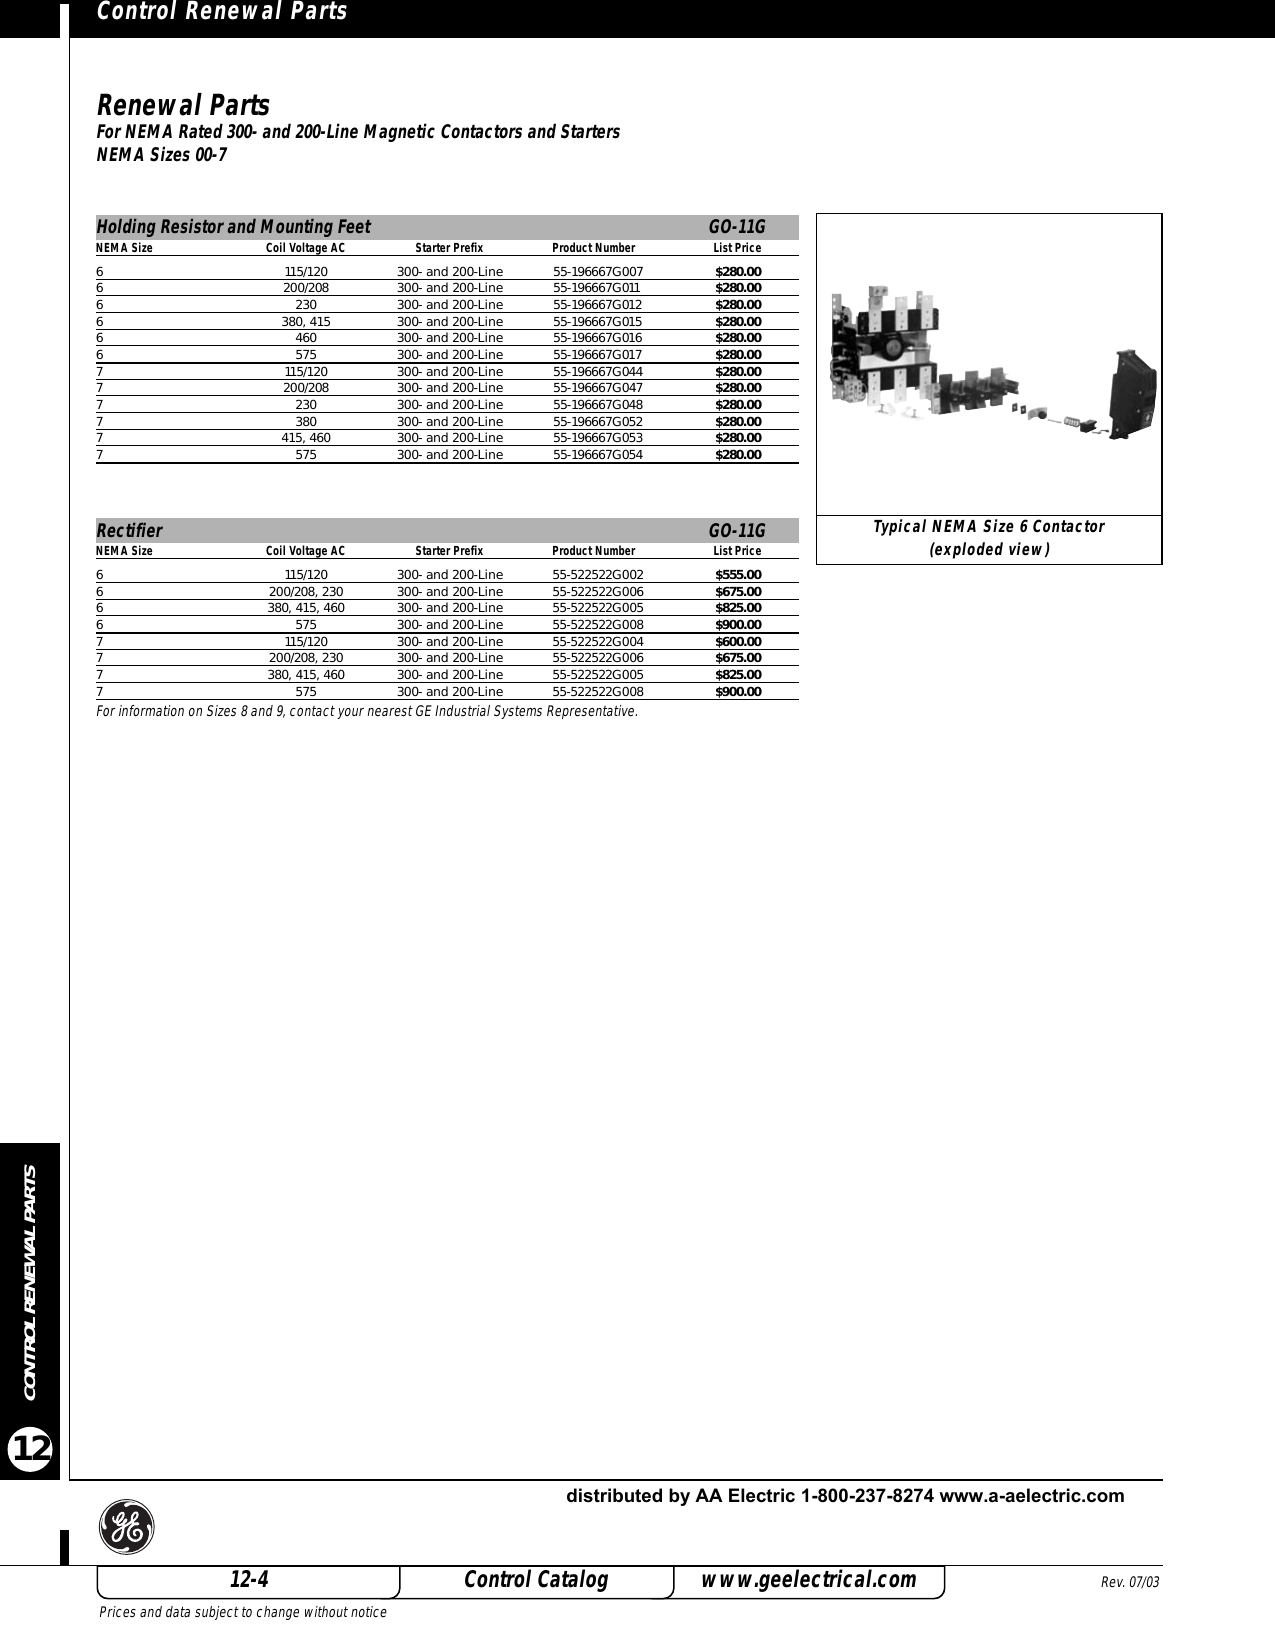 Page 4 of 8 - GE 2005 Control Catalog - Section 12  522426-Catalog